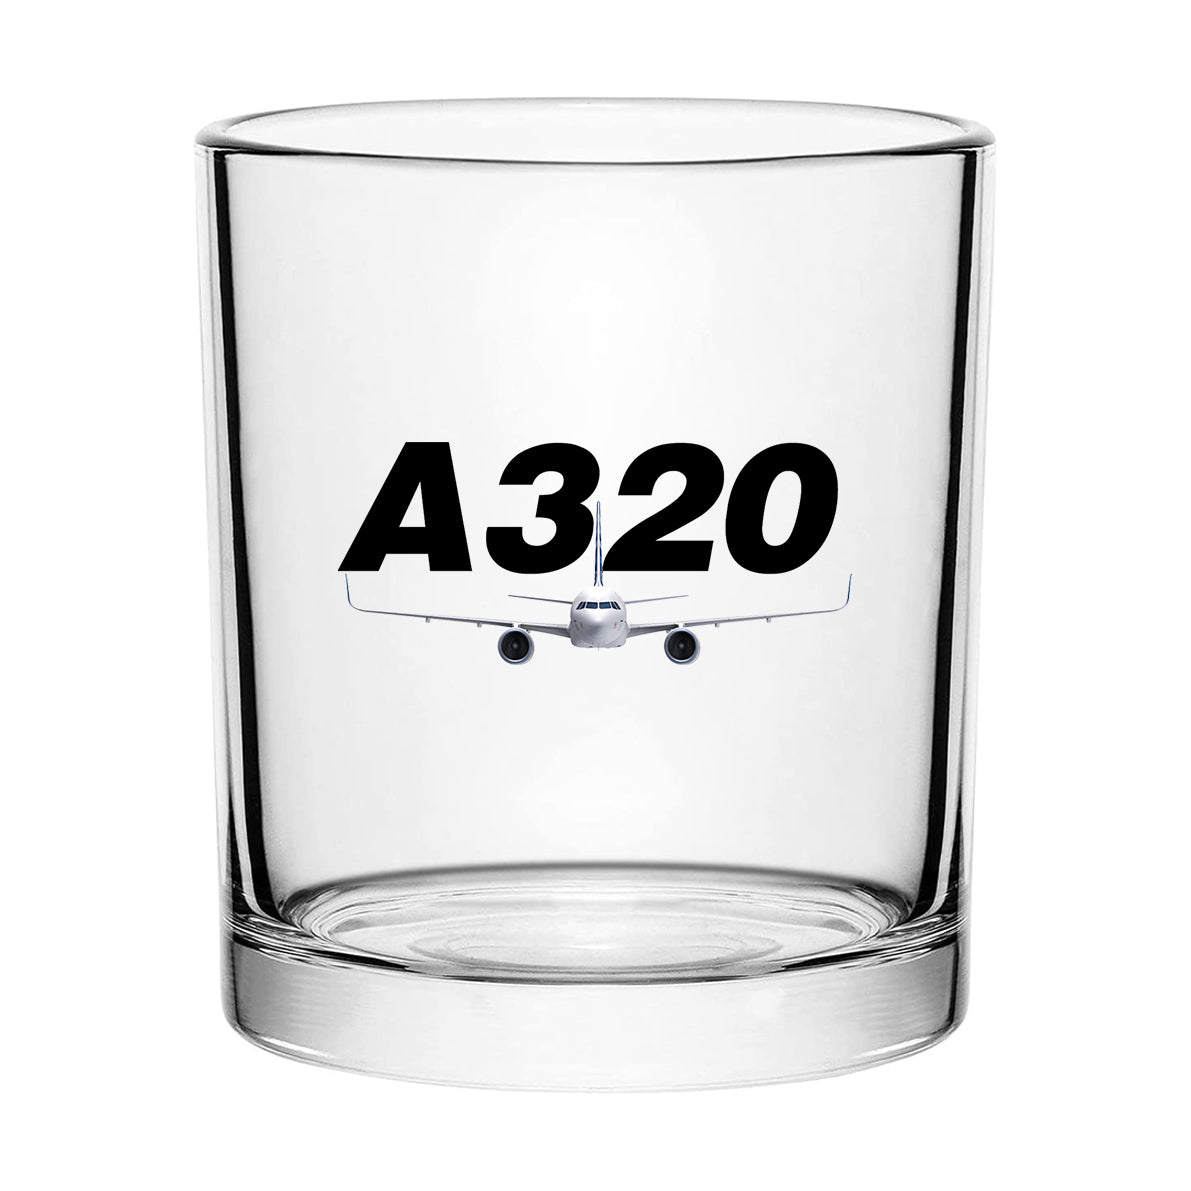 Super Airbus A320 Designed Special Whiskey Glasses